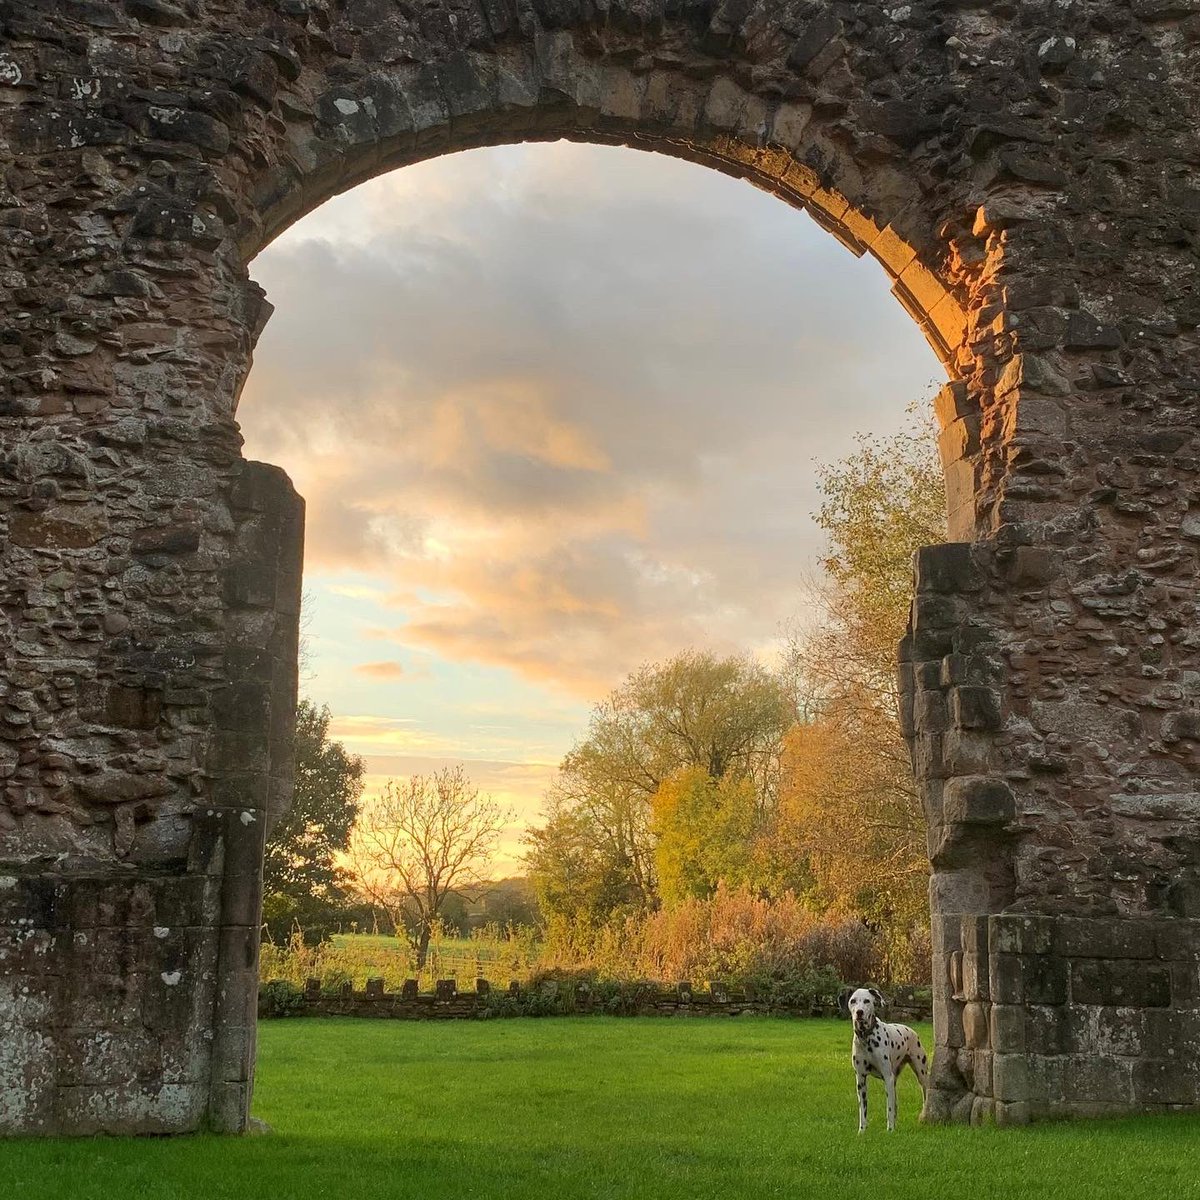 On our way back from rehoming a Dobie, Cora and I stopped at Lilleshall Abbey - beautiful ruins and late sunshine #Shropshire @EnglishHeritage #dogsoftwitter #dalmatian